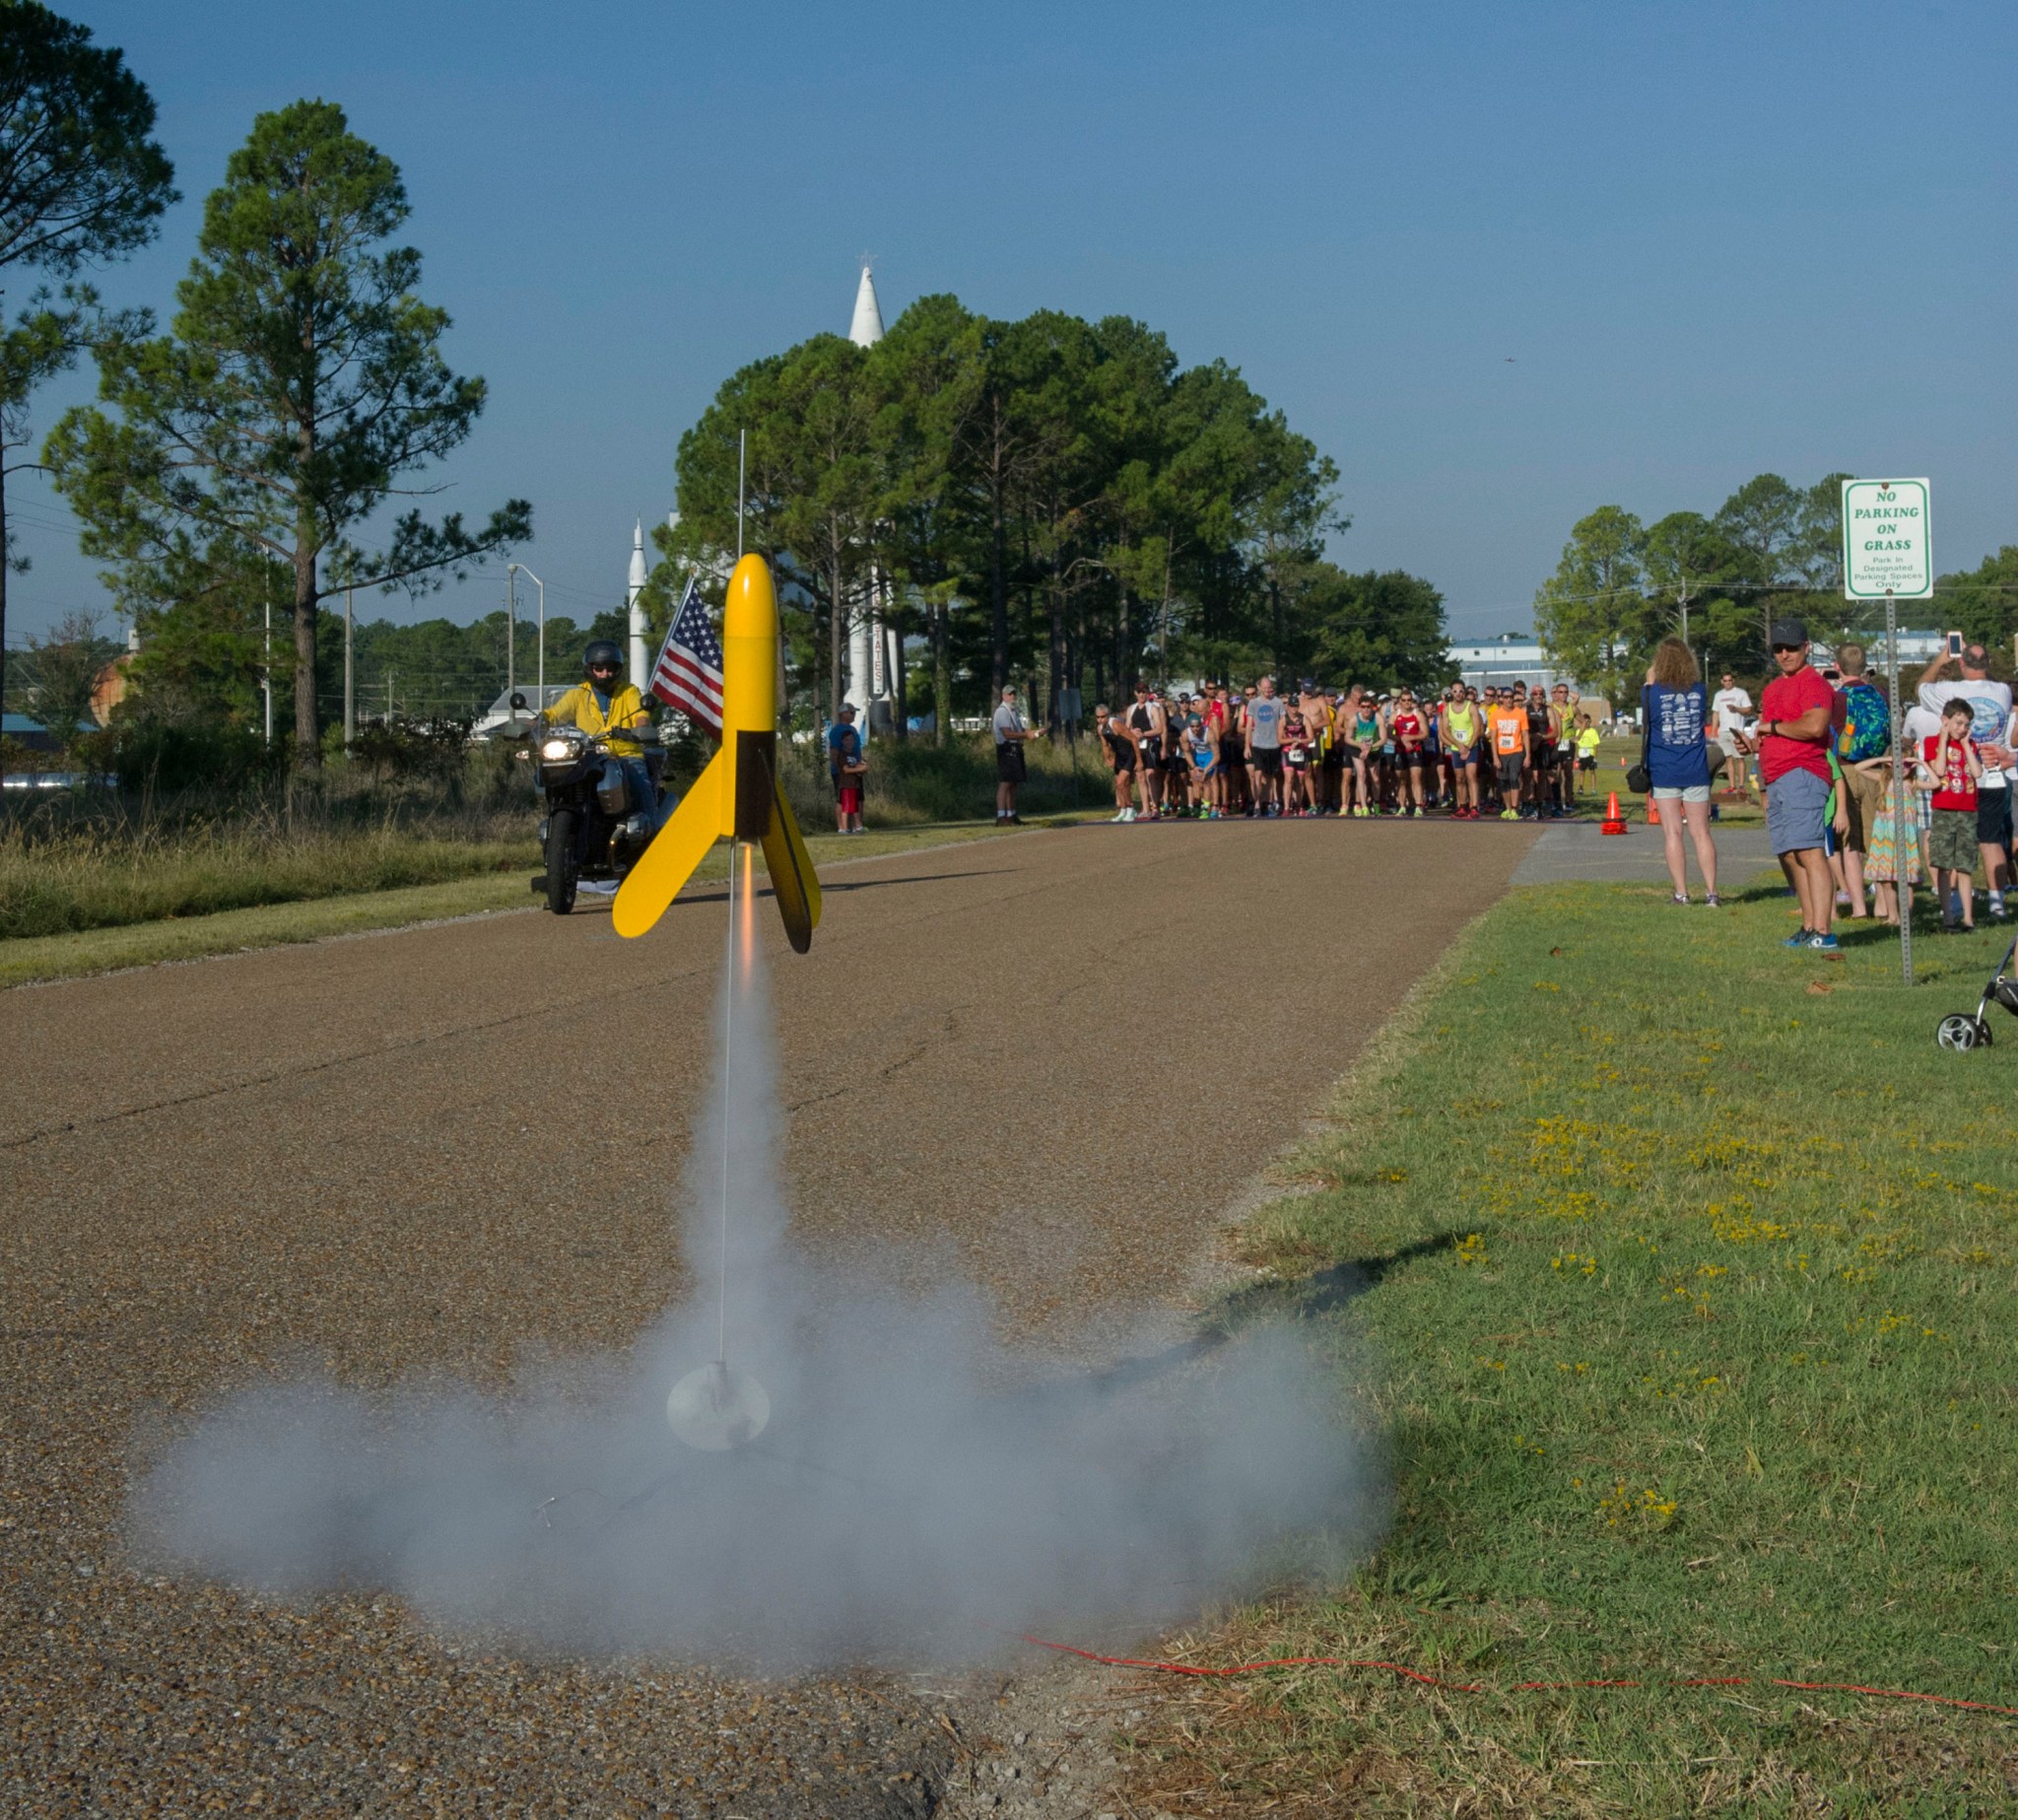 A model rocket launch officially signifies the start of the first running section of the 2016 Racin' the Station duathlon. 